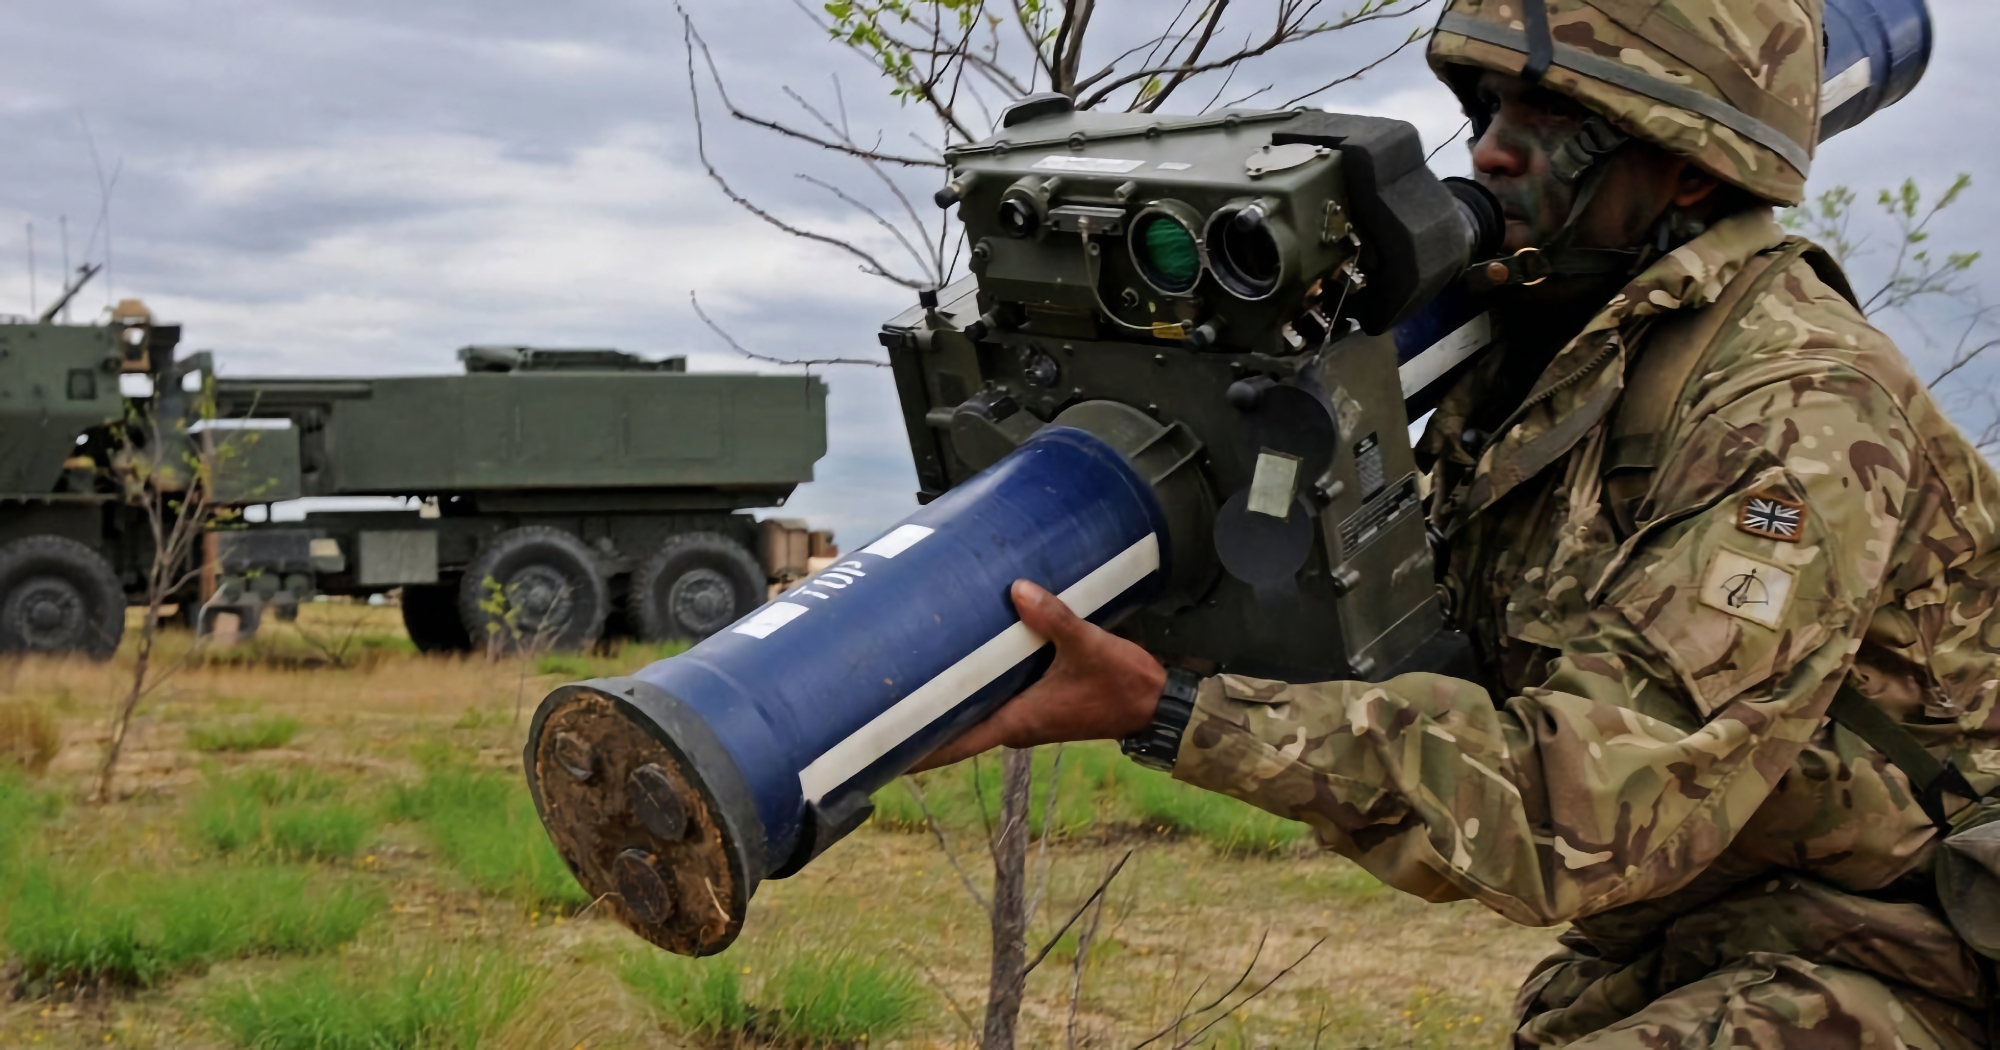 The UK will supply Ukraine with additional Martlet man-portable air defence systems with a dual-channel guidance system and a target engagement range of up to 8 km